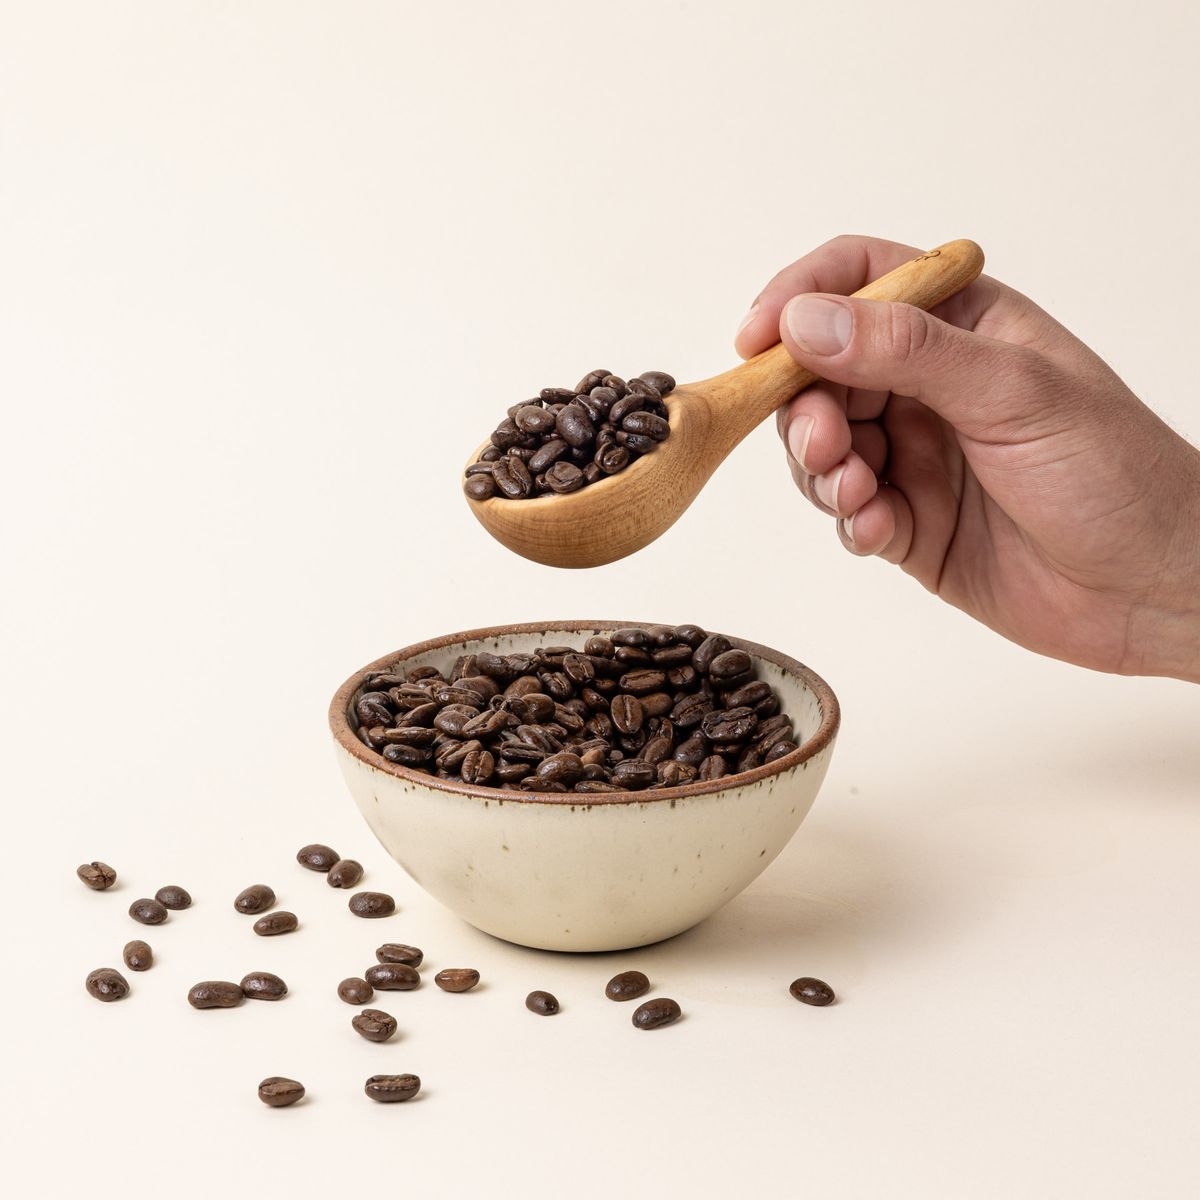 A hand holds a short wooden coffee scoop filled with coffee beans over a small bowl